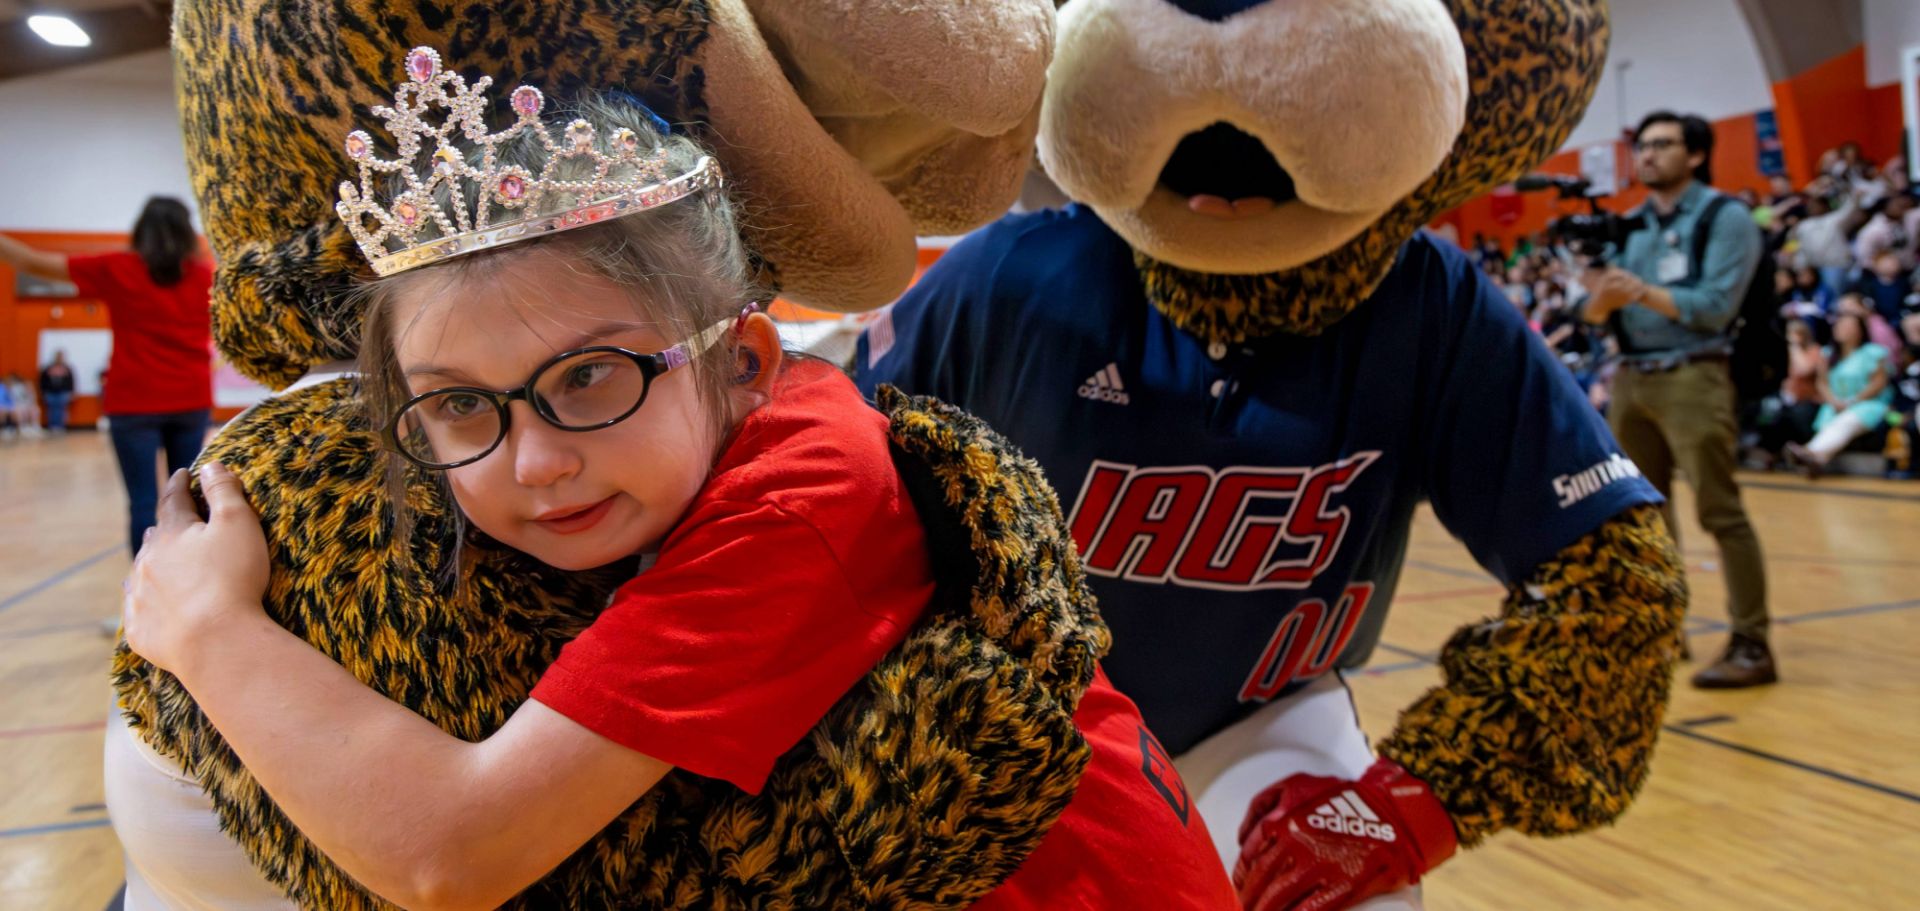 USA Health celebrates Children’s Miracle Network Champion Maci Brown with crowning ceremony